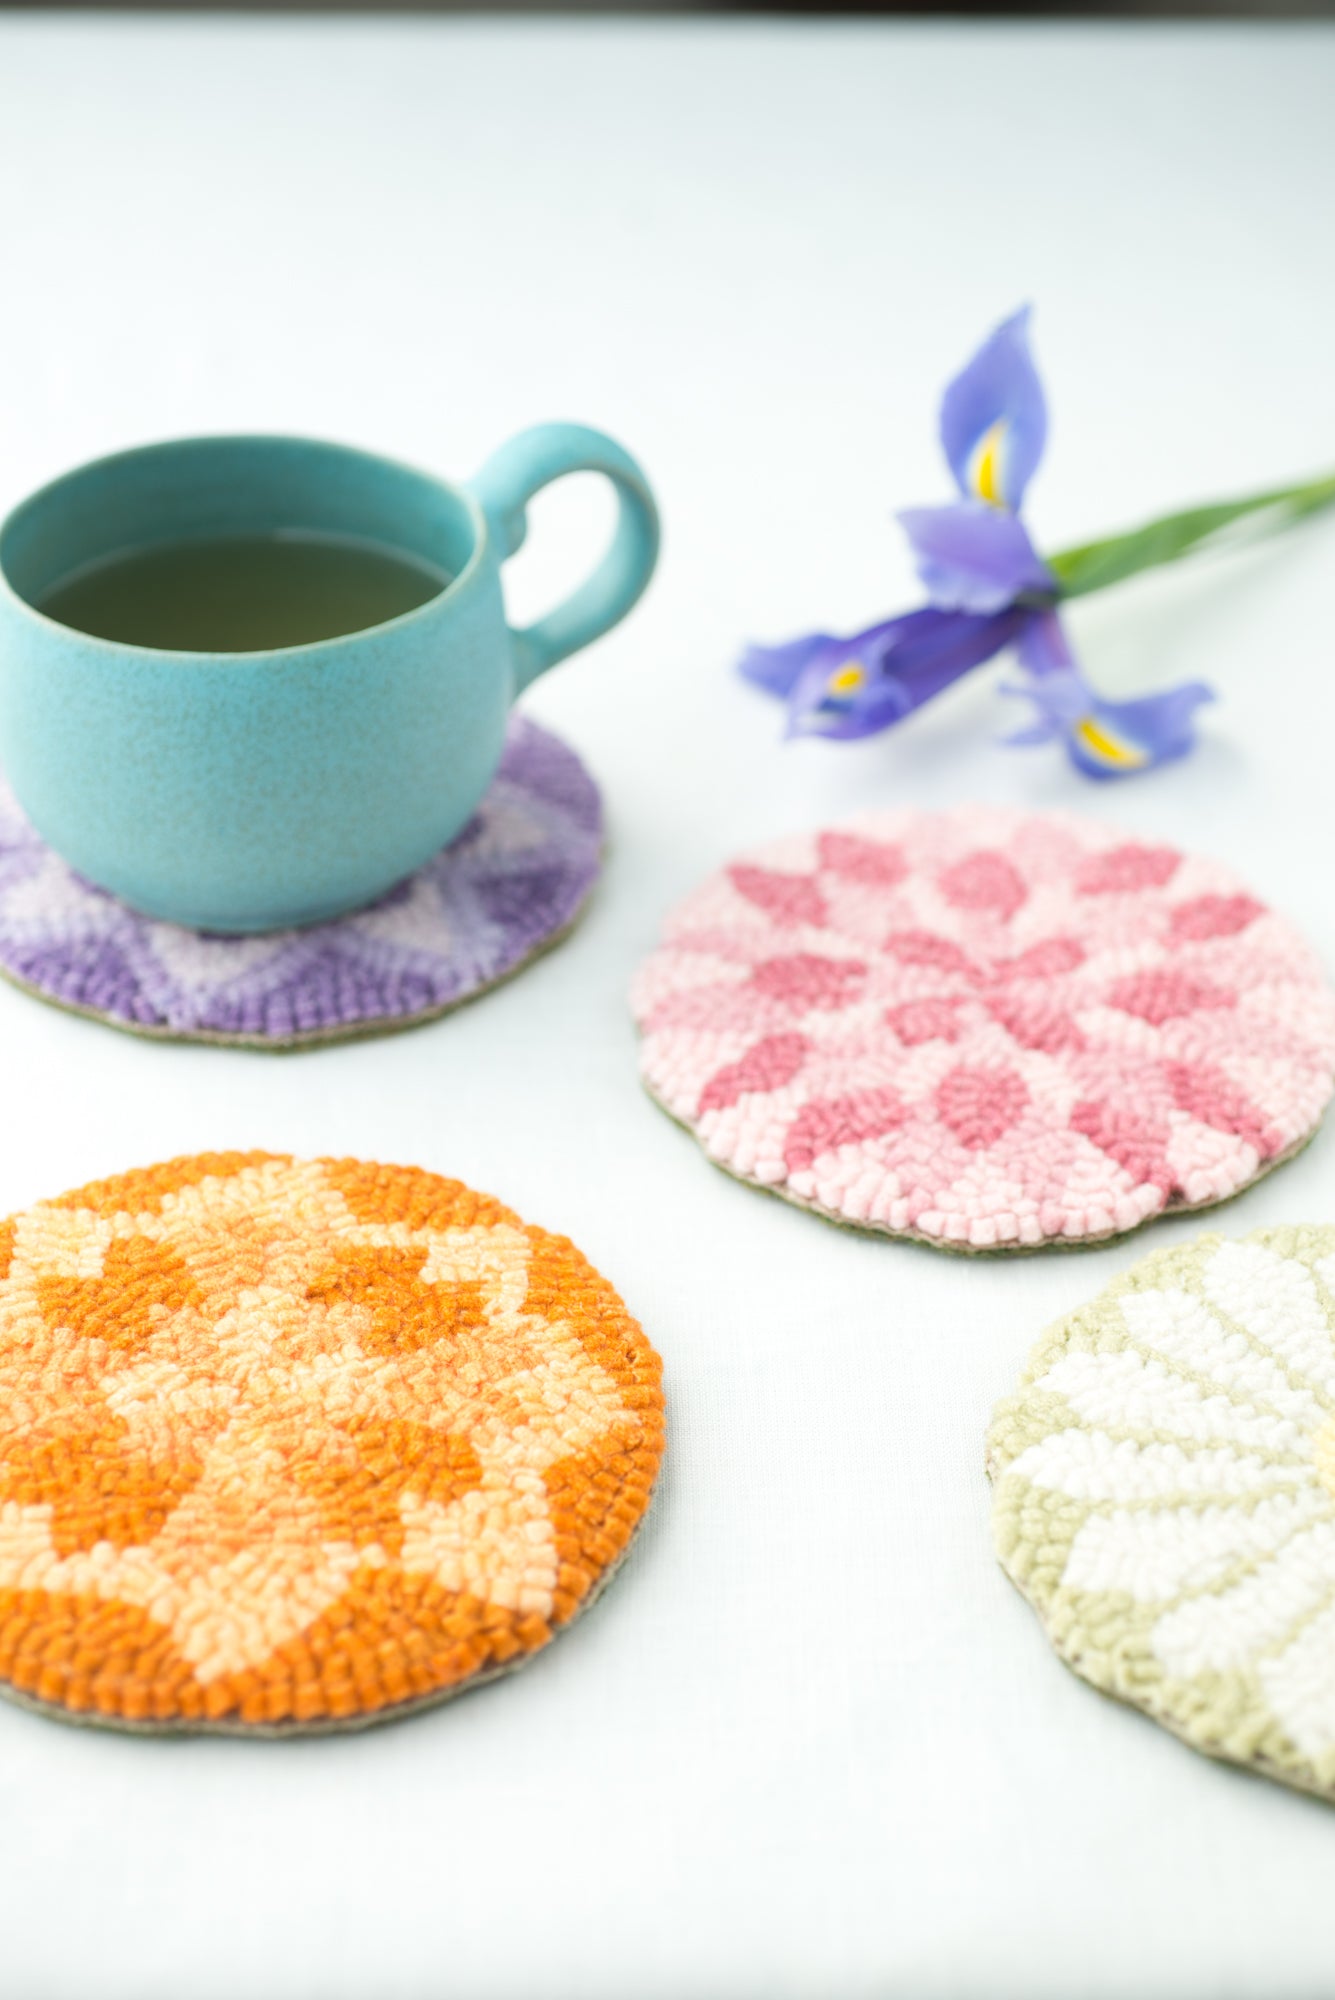 Floral Geometric coasters - 5" round, set of 4 - functional art - as seen in Making Magazine